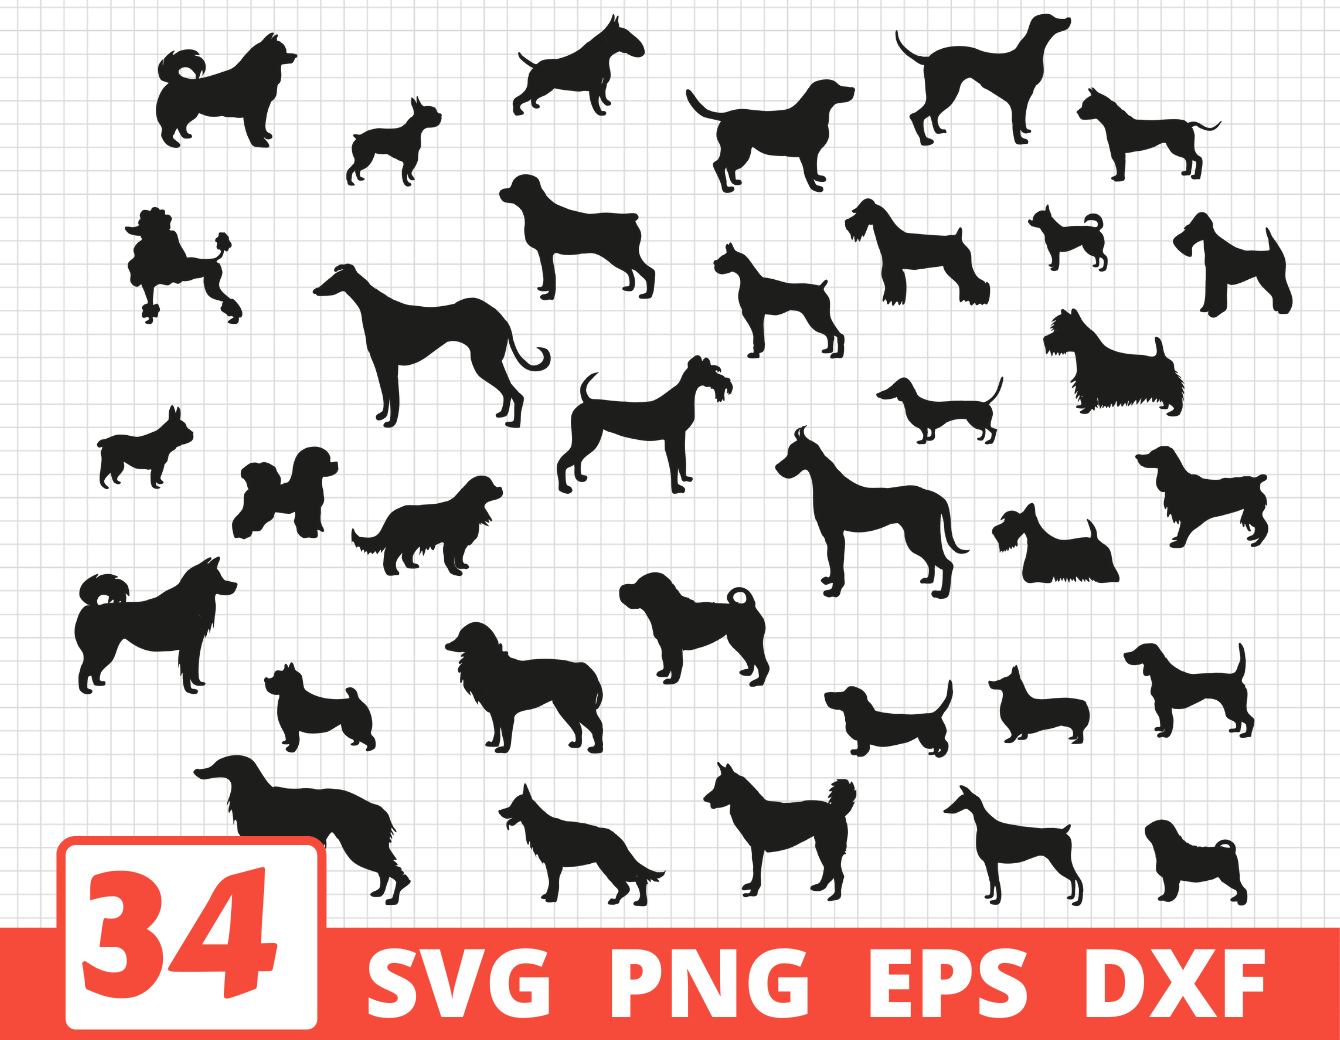 PNG silhouette cut file, cricut digital jpg Everyday is Better with a Cocker Spaniel on DXF SVG cut file